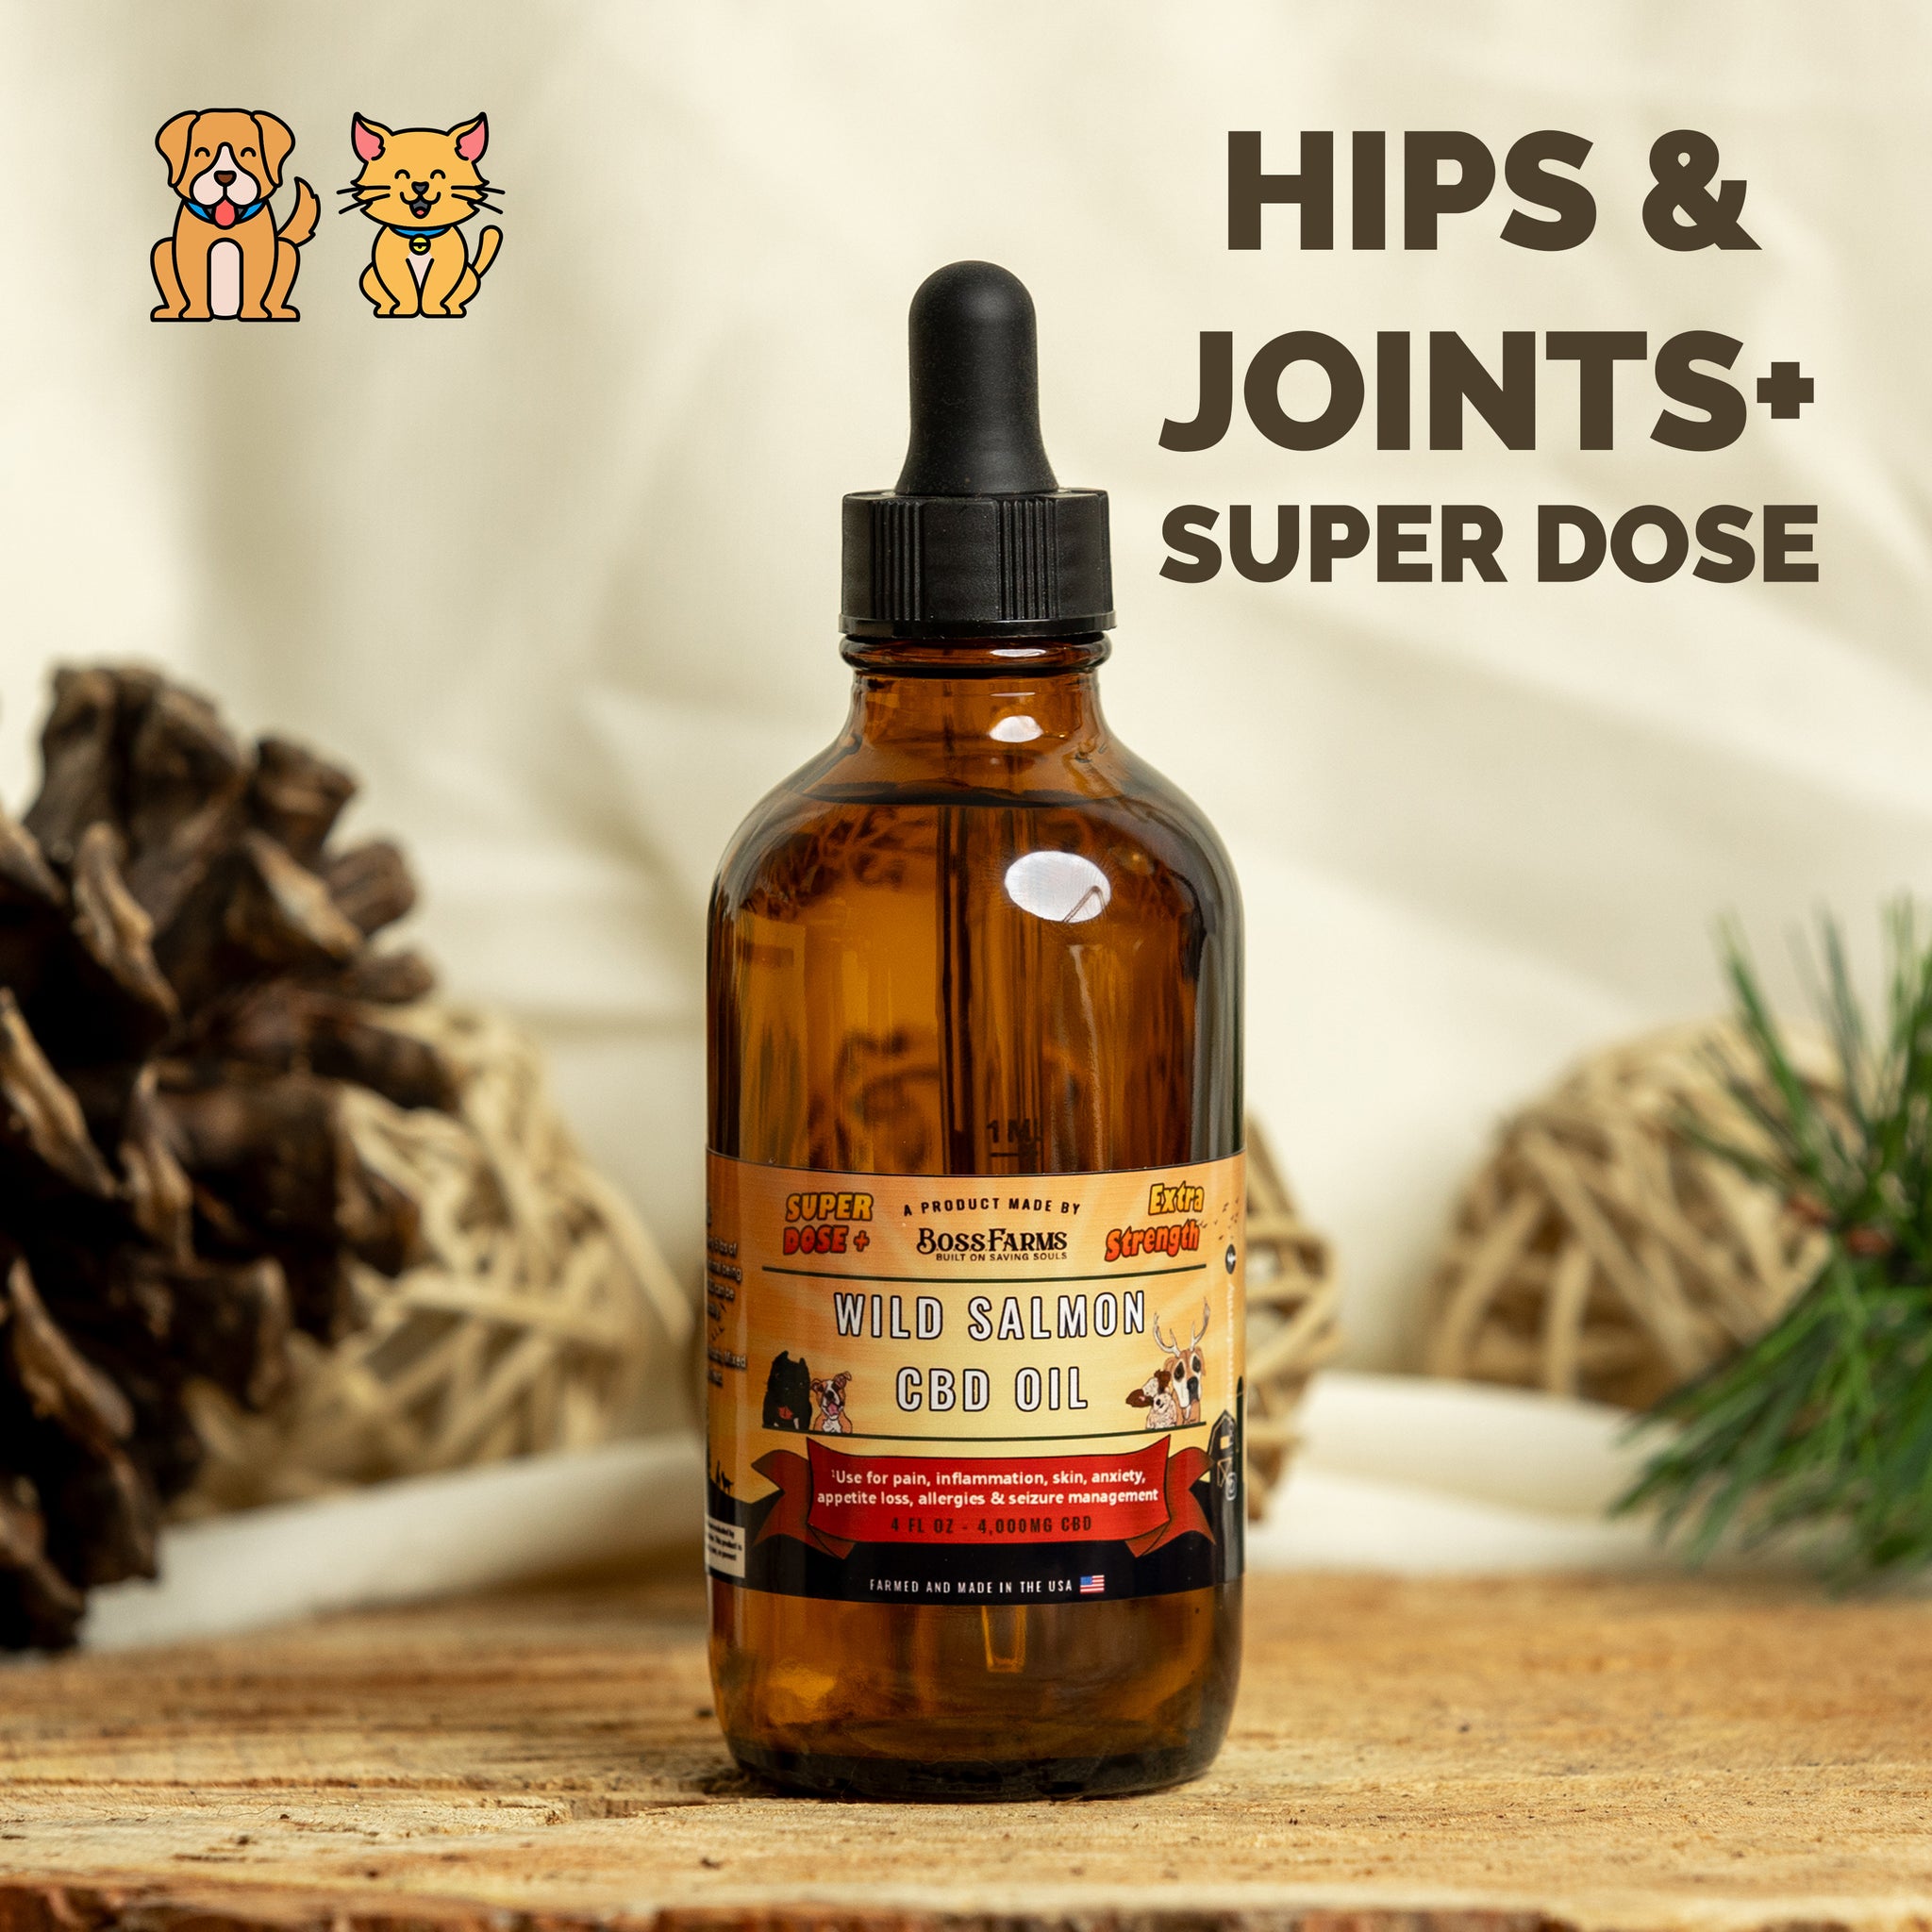 SUPER Wild Salmon CBD Oil - 4 oz - 4,000 mg! Healthy Hips & Joints Care Formula CBD for dogs and cats